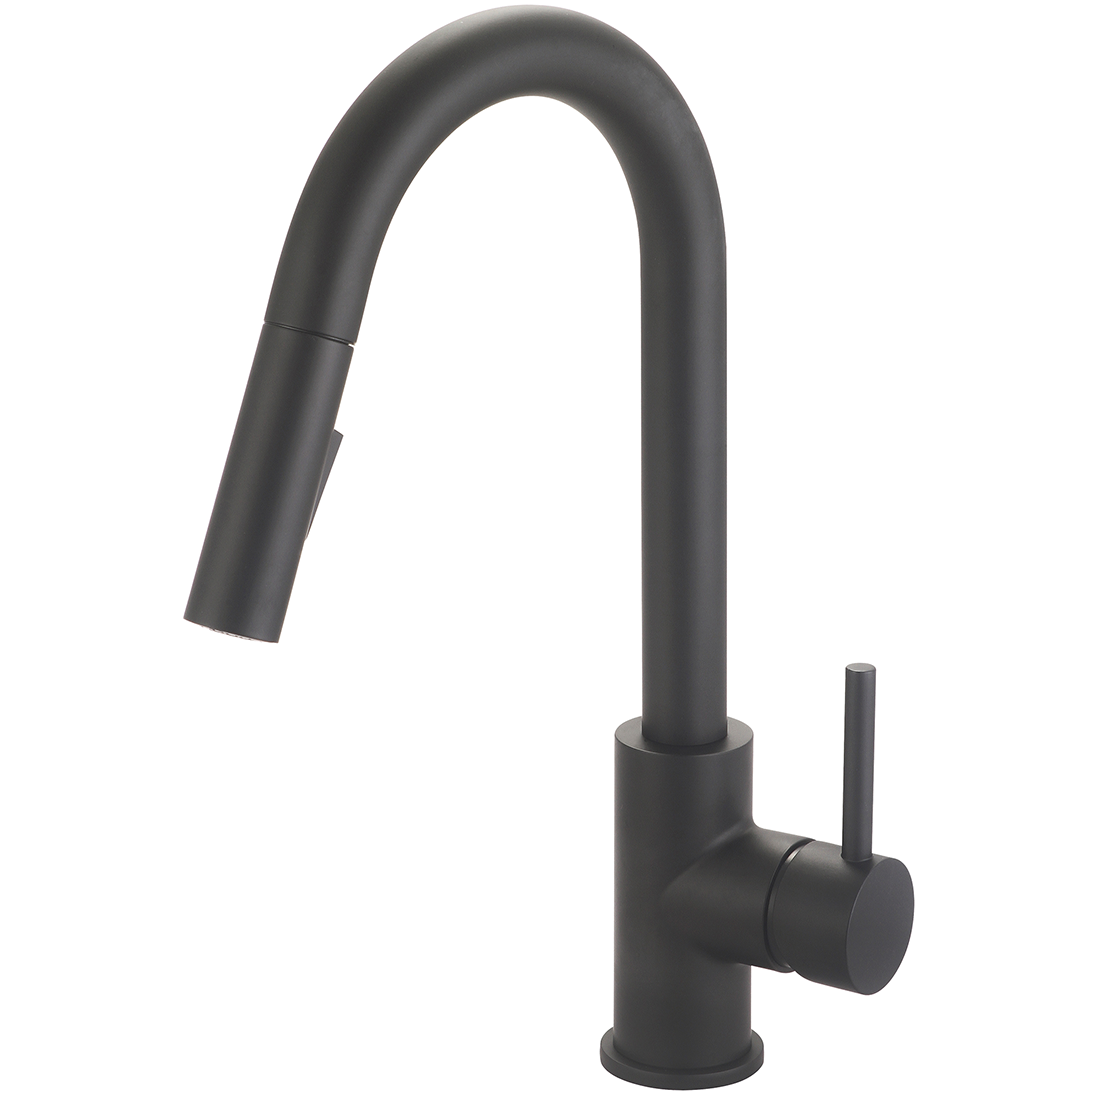 Olympia single-handle-pull-down-kitchen-faucet Model #K-5080